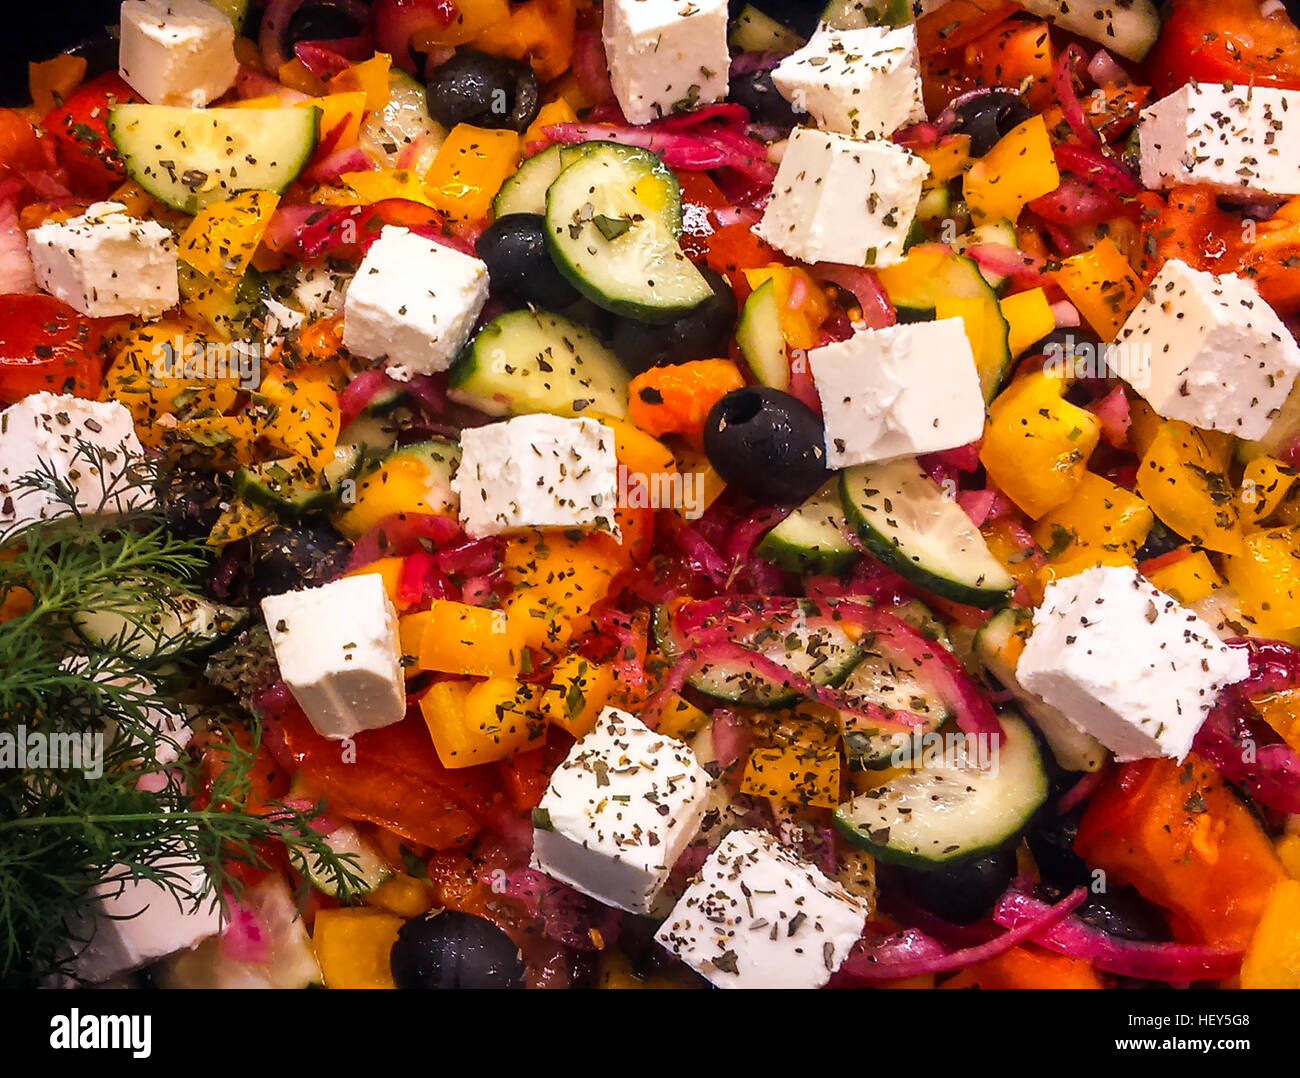 Salad of red and yellow bell peppers, black olives and feta cheese Stock Photo